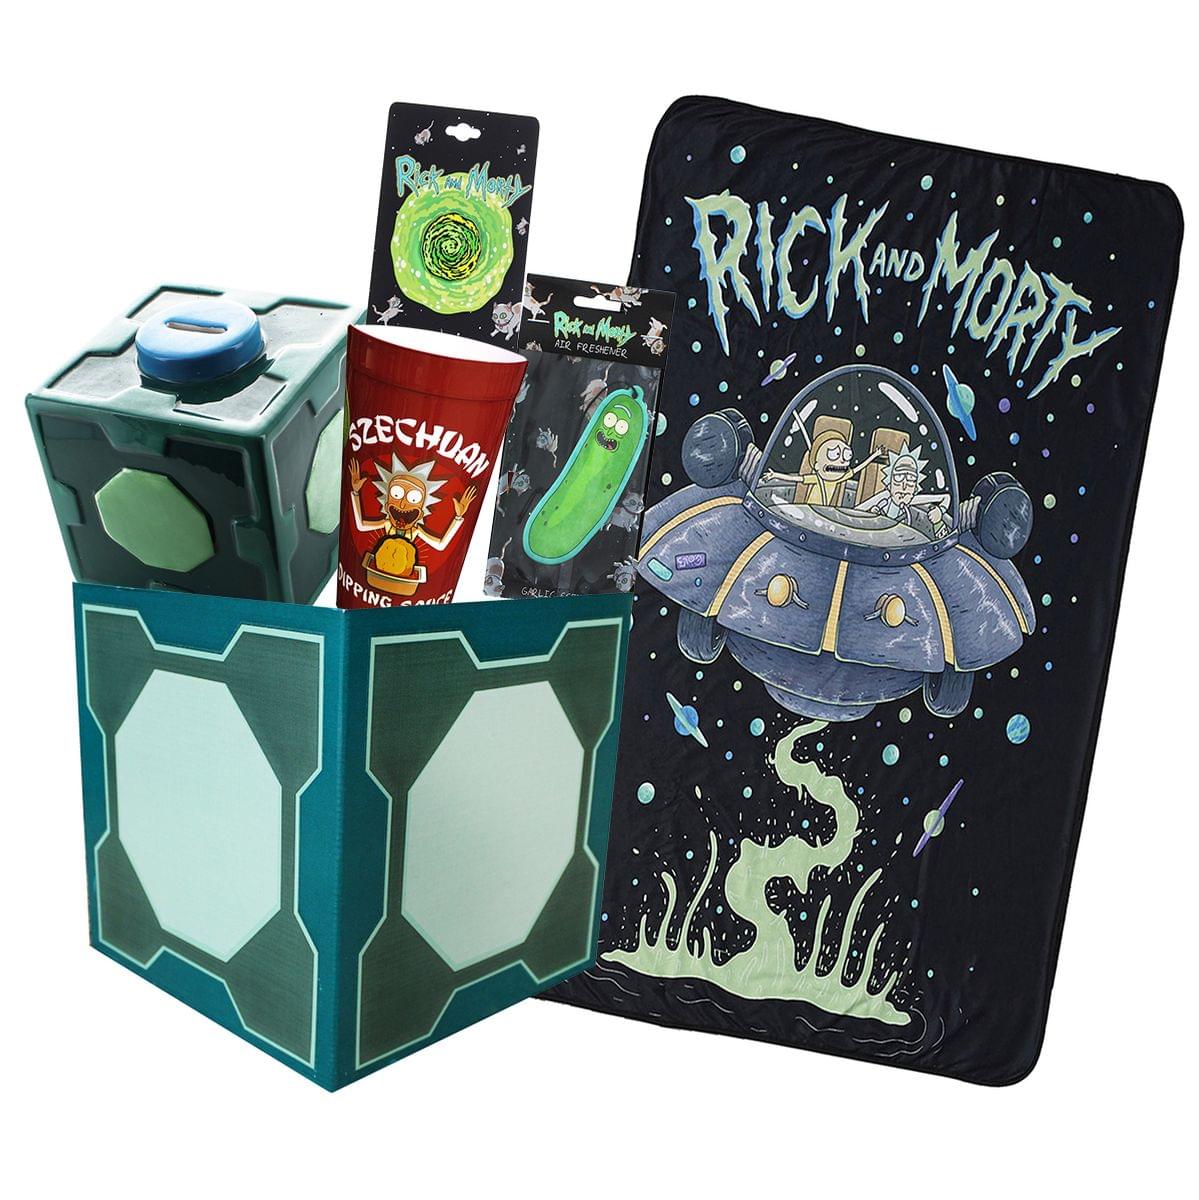 Rick and Morty Collectibles | Collector's LookSee Box | Throw Blanket and More